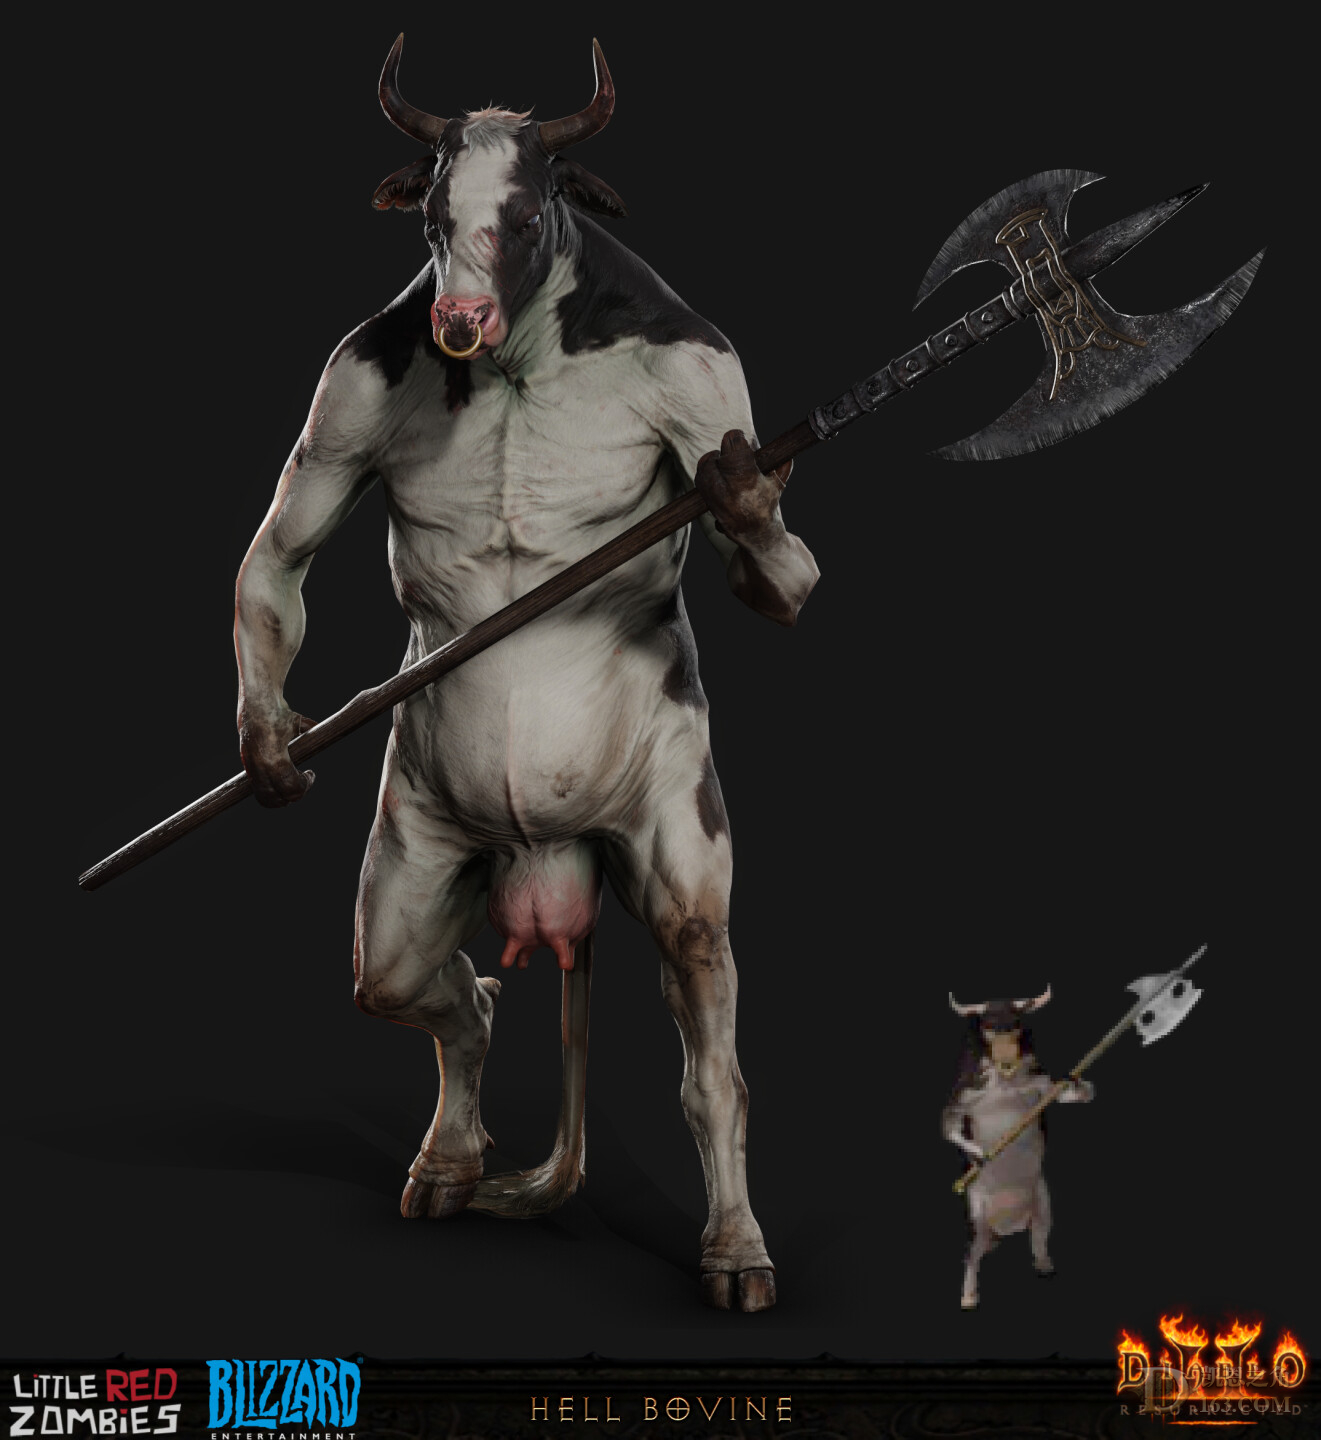 little-red-zombies-thecowking-textured-compare.jpg